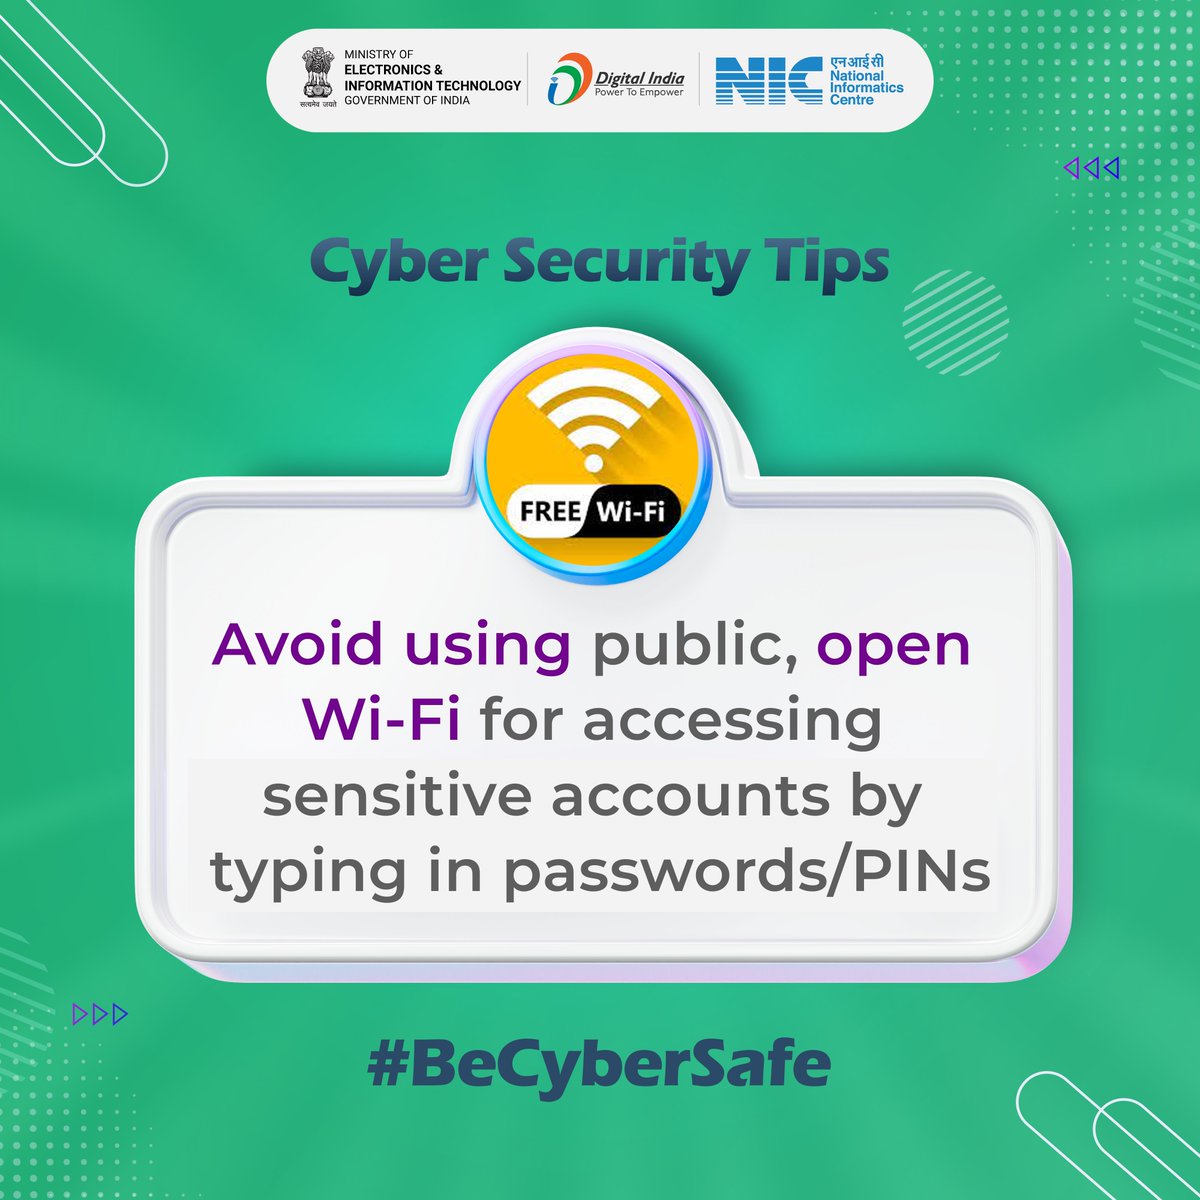 #CyberSecurityTips

Avoid using public, open WiFi 🛜 for accessing sensitive accounts by typing in passwords and PINs.

Courtesy: @SSOIndia 
#NICMeitY #CyberSecurityAwareness #CyberSecurity #BeSafeOnline